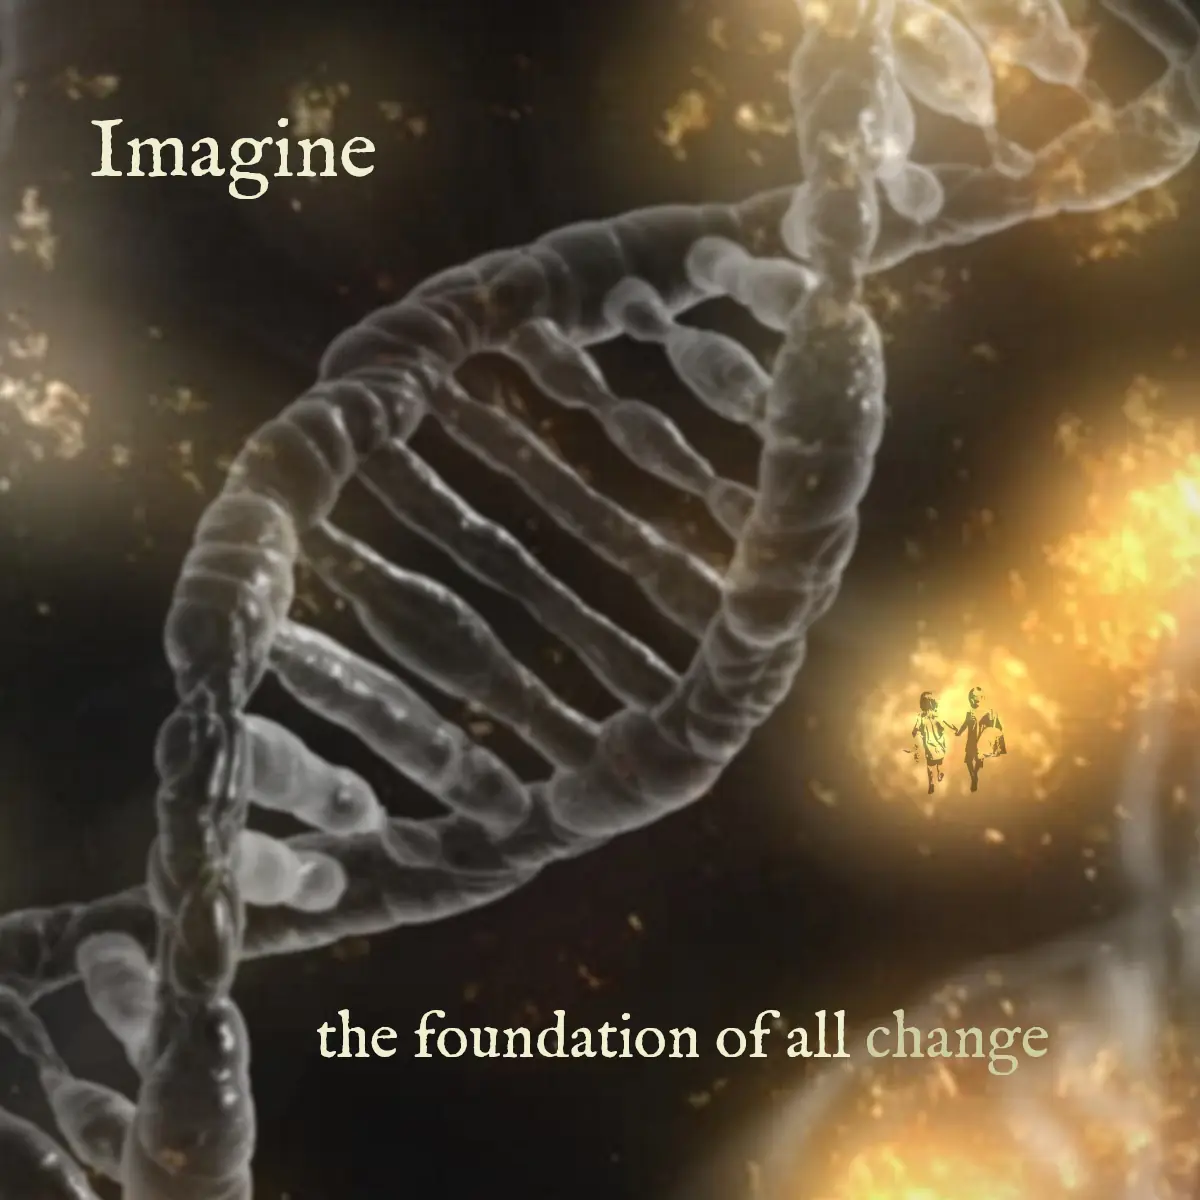 A microscopic image of a DNA segment. The background is a dark colour with gold highlights. Text reads: Imagine in the top left corner and 'the foundations of all change' in the bottom left.